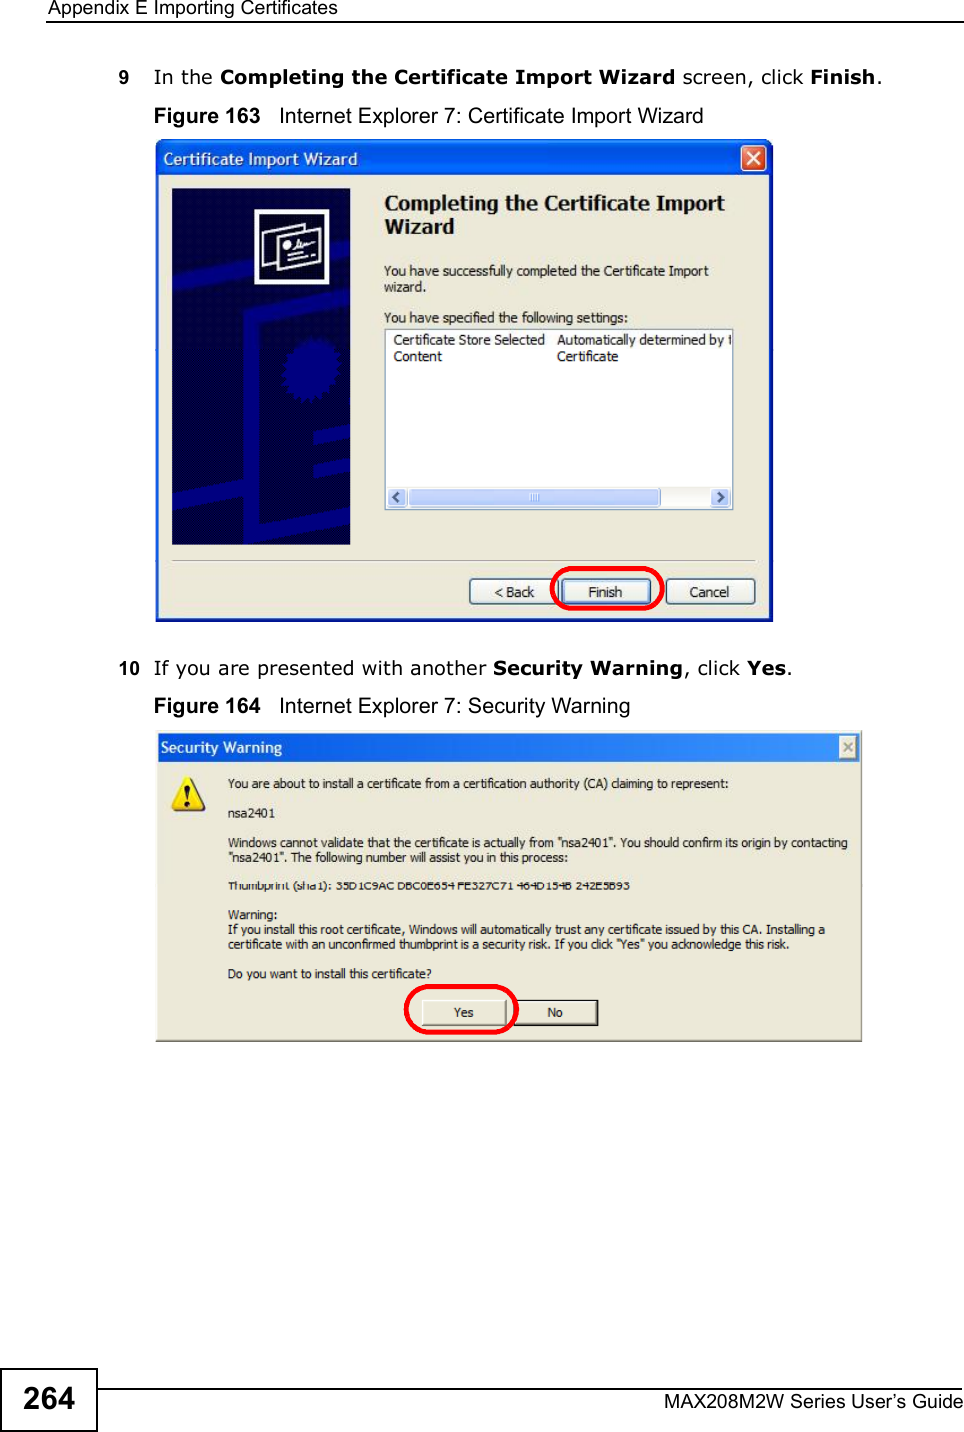 Appendix EImporting CertificatesMAX208M2W Series User s Guide2649In the Completing the Certificate Import Wizard screen, click Finish.Figure 163   Internet Explorer 7: Certificate Import Wizard10 If you are presented with another Security Warning, click Yes.Figure 164   Internet Explorer 7: Security Warning